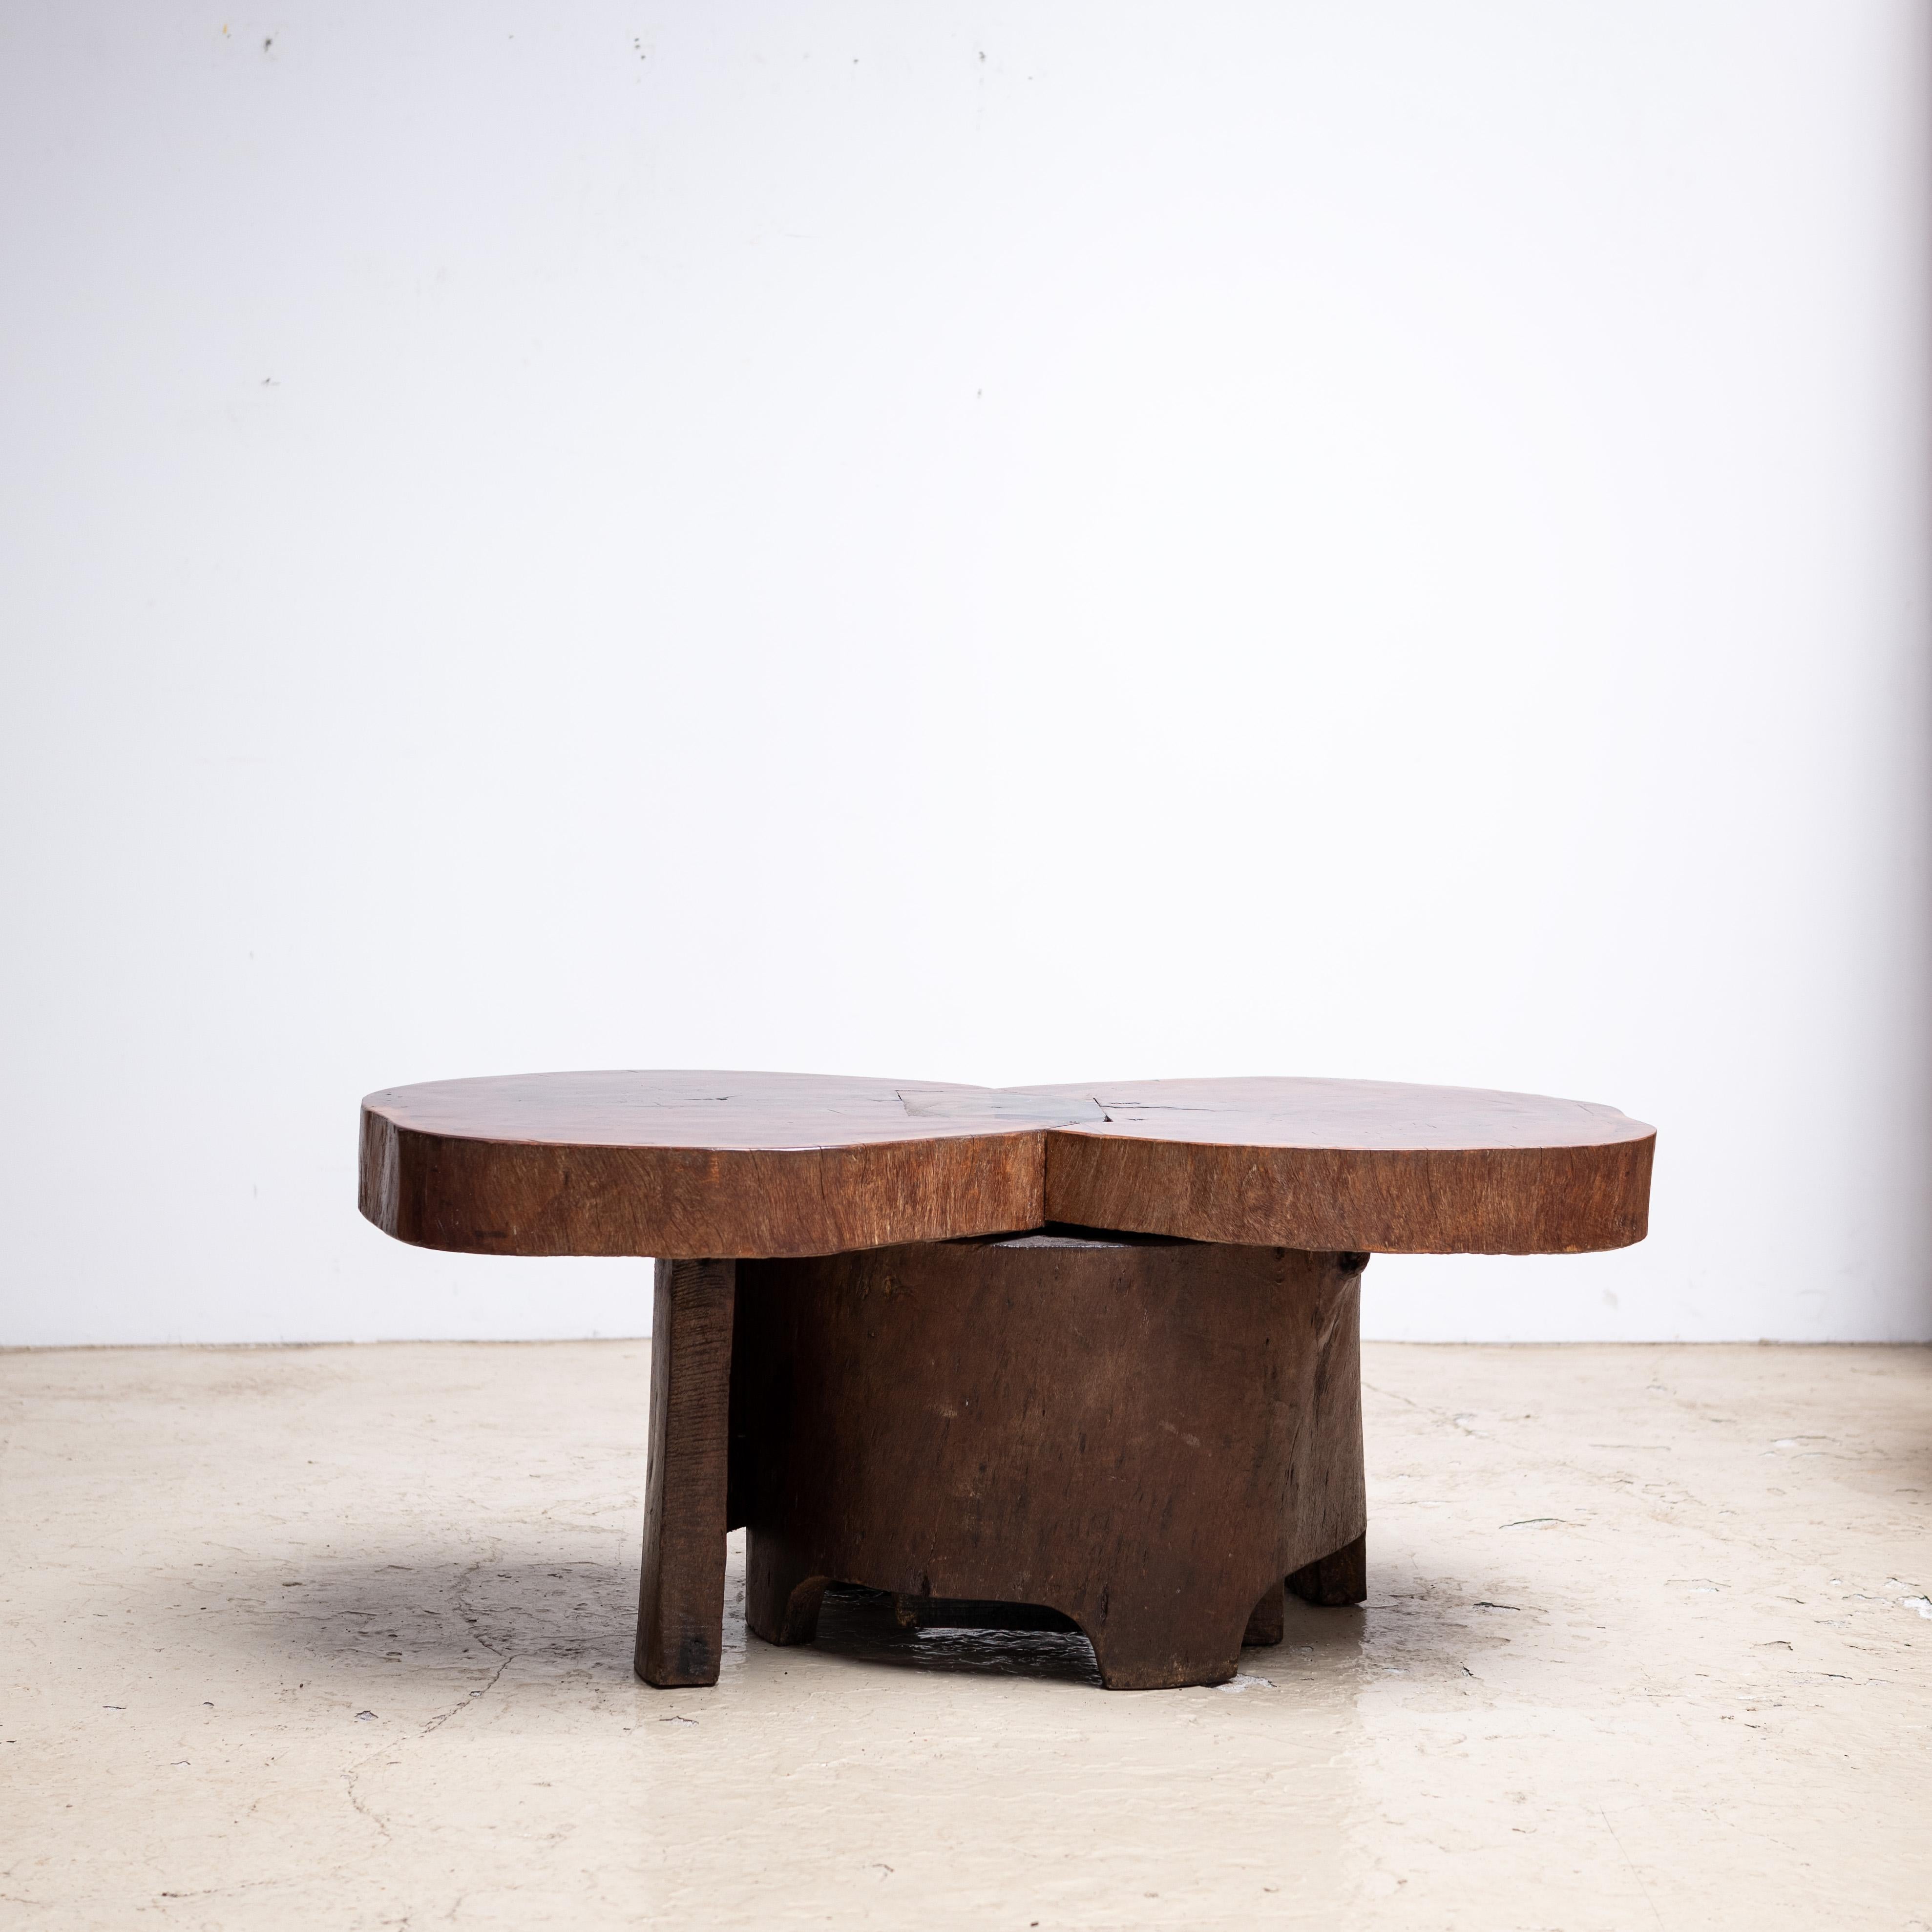 Low table designed by José Zanine Caldas. Circa 1970s.
This table was integrated with the architectural columns of the Zanine Caldas in Bahia. The pillar was passed through the center of this table.